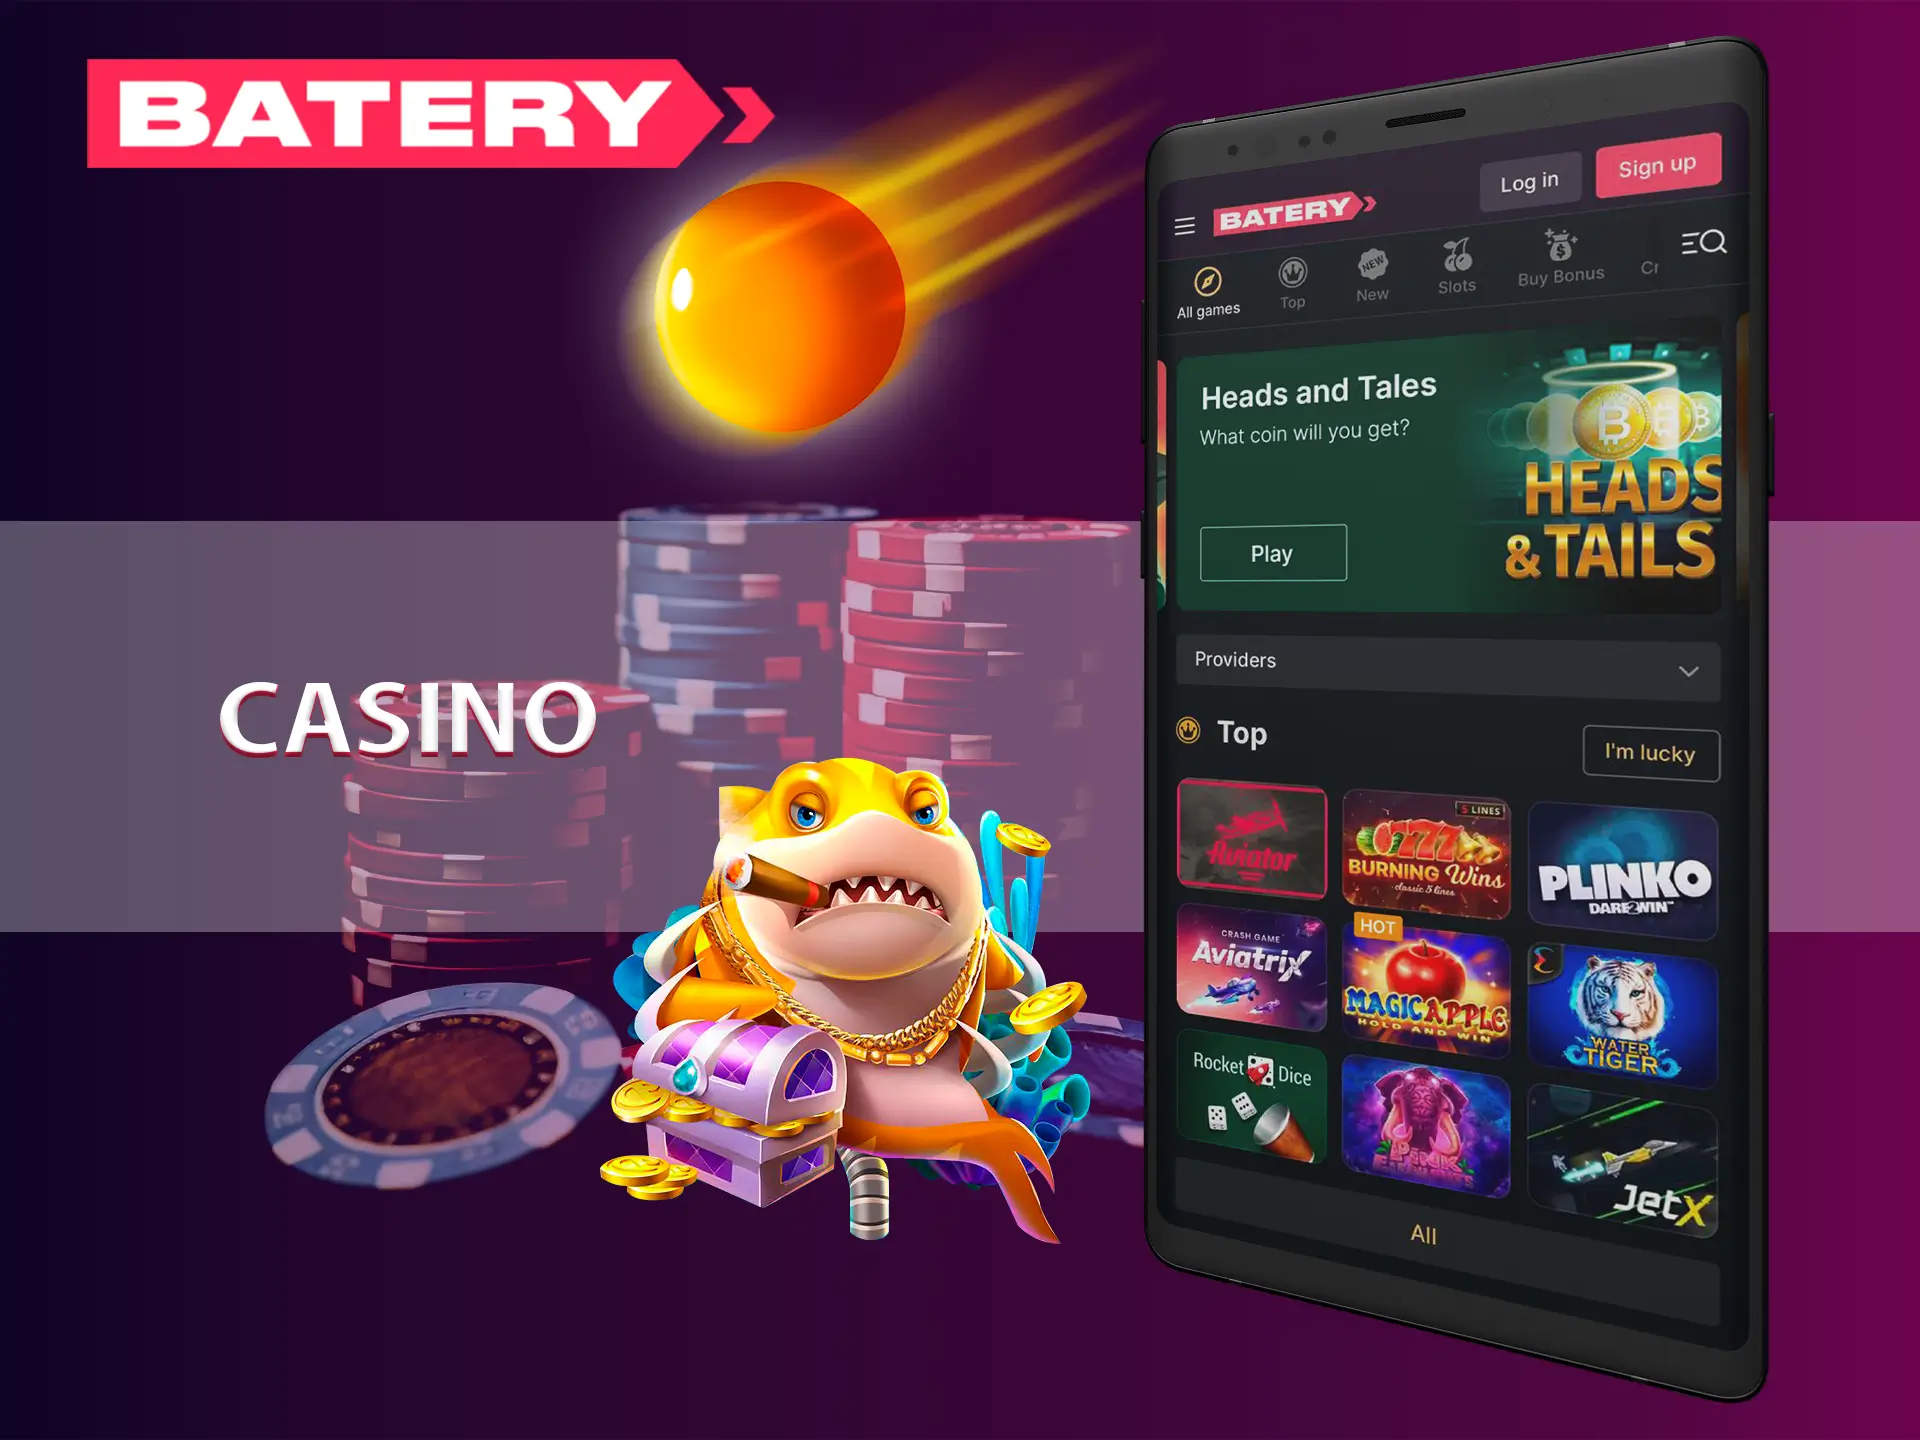 A huge number of games are available at Batery casino.